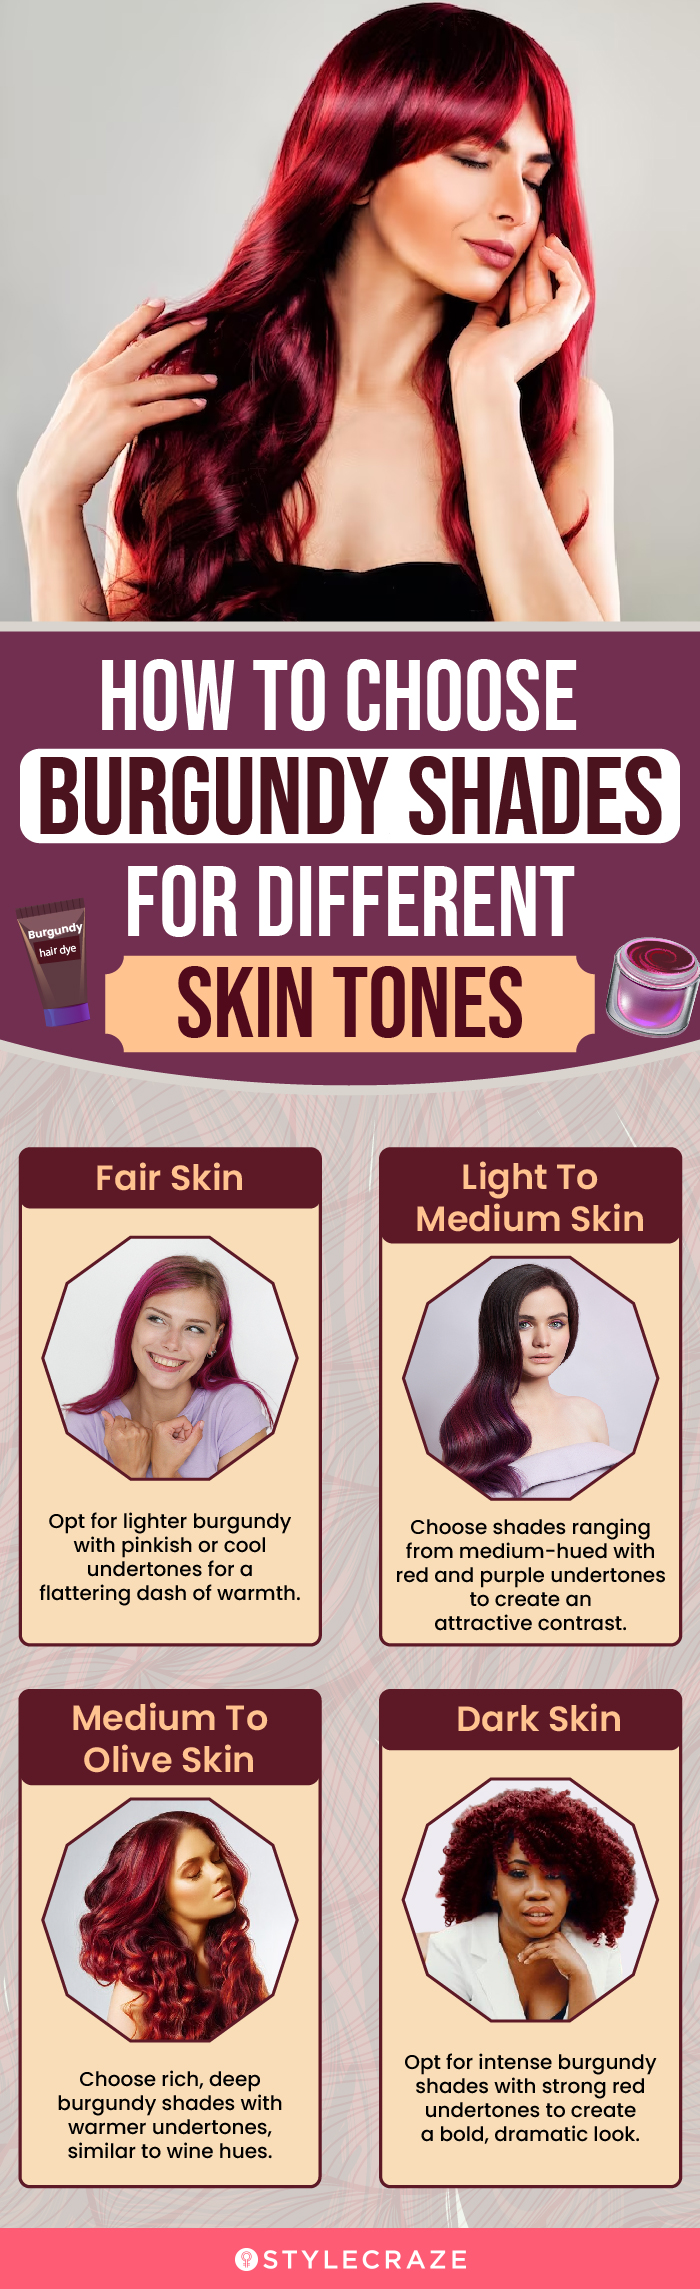 How To Choose Burgundy Shades For Different Skin Tones (infographic)